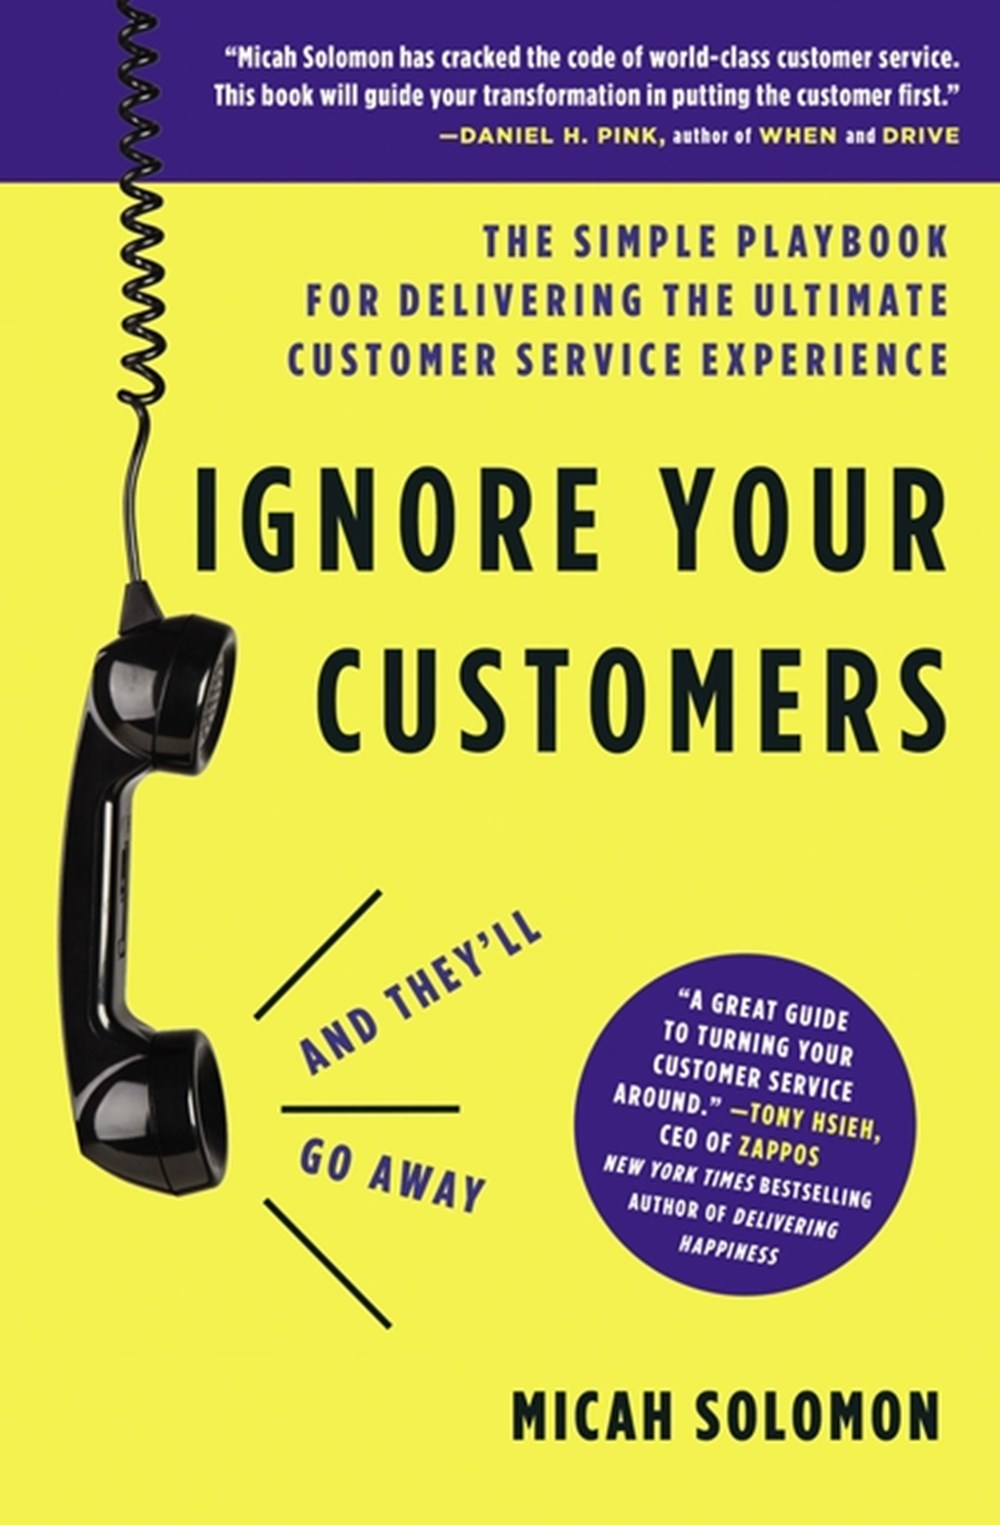 Ignore Your Customers (and They'll Go Away) The Simple Playbook for Delivering the Ultimate Customer